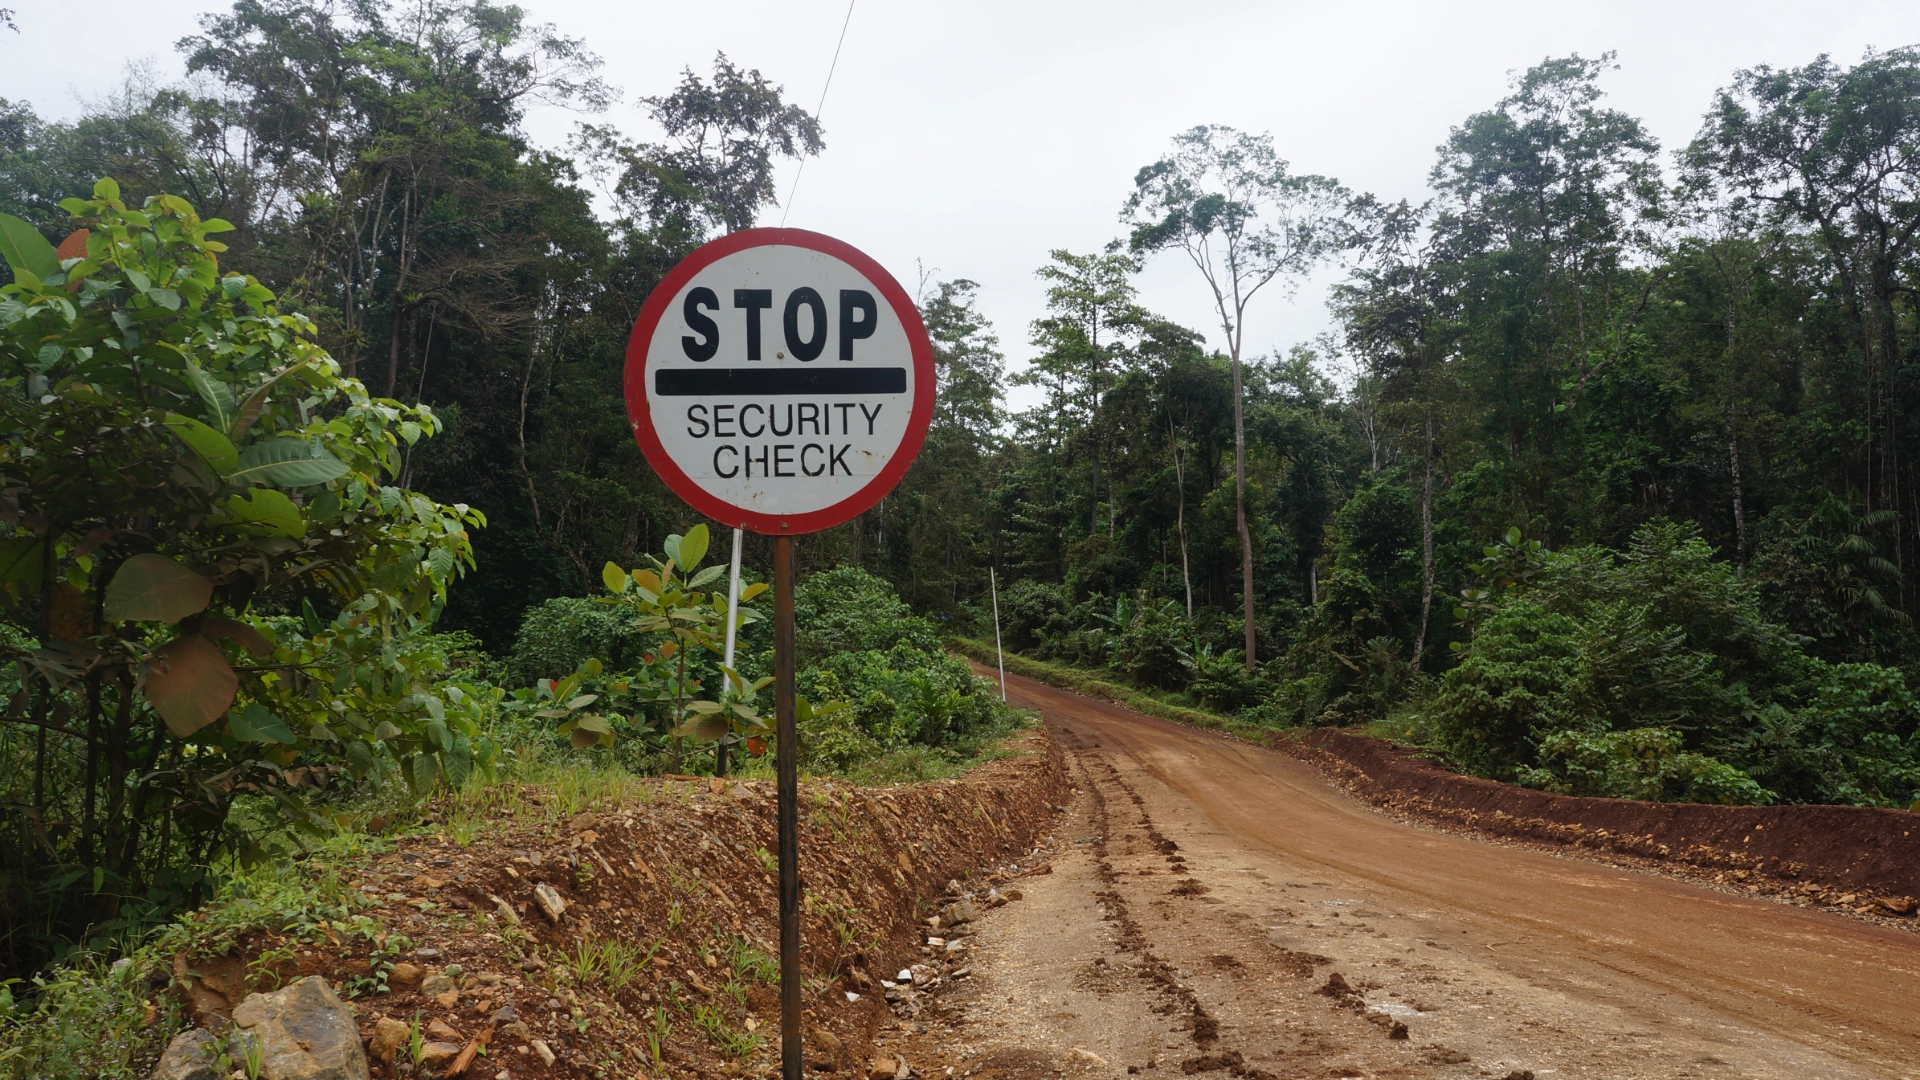 Road to the SCM nickel mine in Sulawesi, which holds one of the world’s largest reserves of nickel